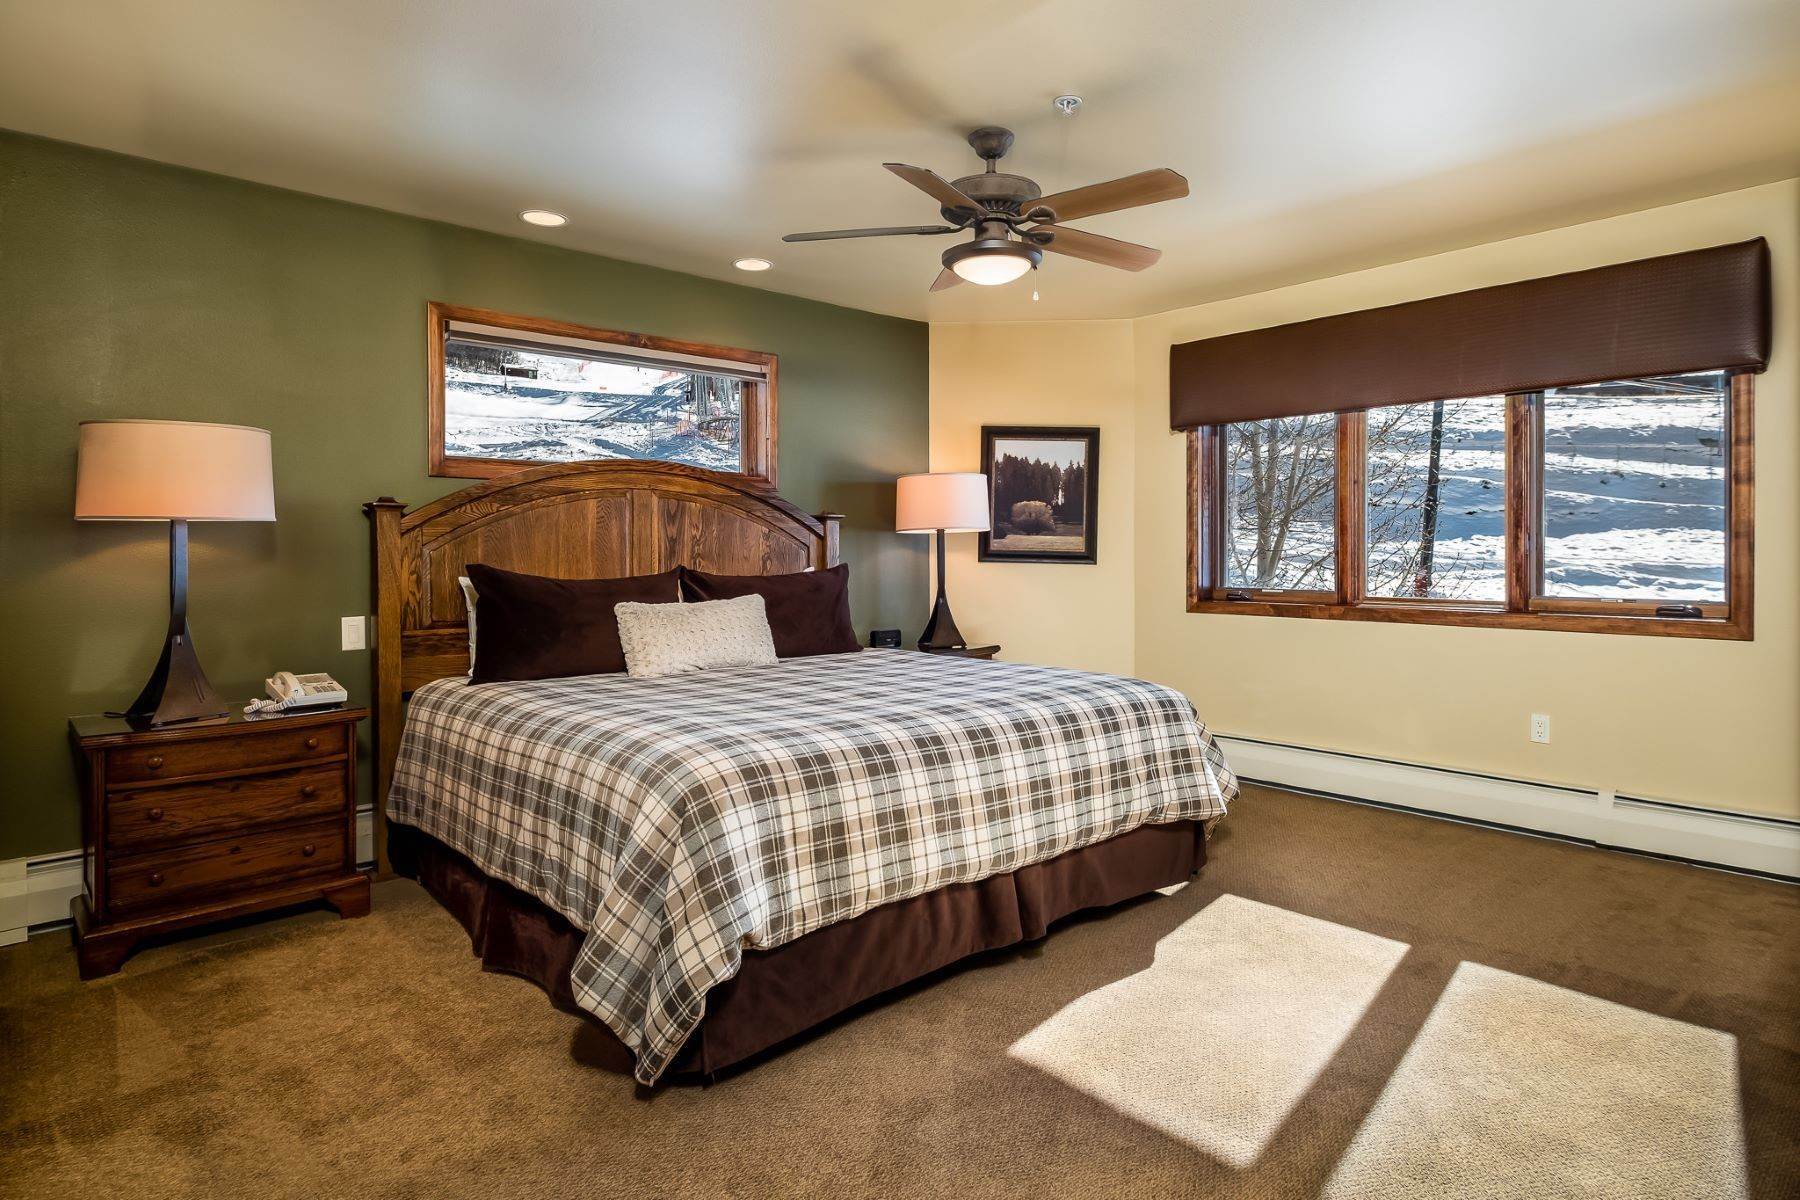 15. Fractional Ownership Property for Sale at Ski-in/Ski-Out Fractional Ownership at it's Finest 2255 Ski Time Square Drive, Unit# 213-3-82 Steamboat Springs, Colorado 80487 United States